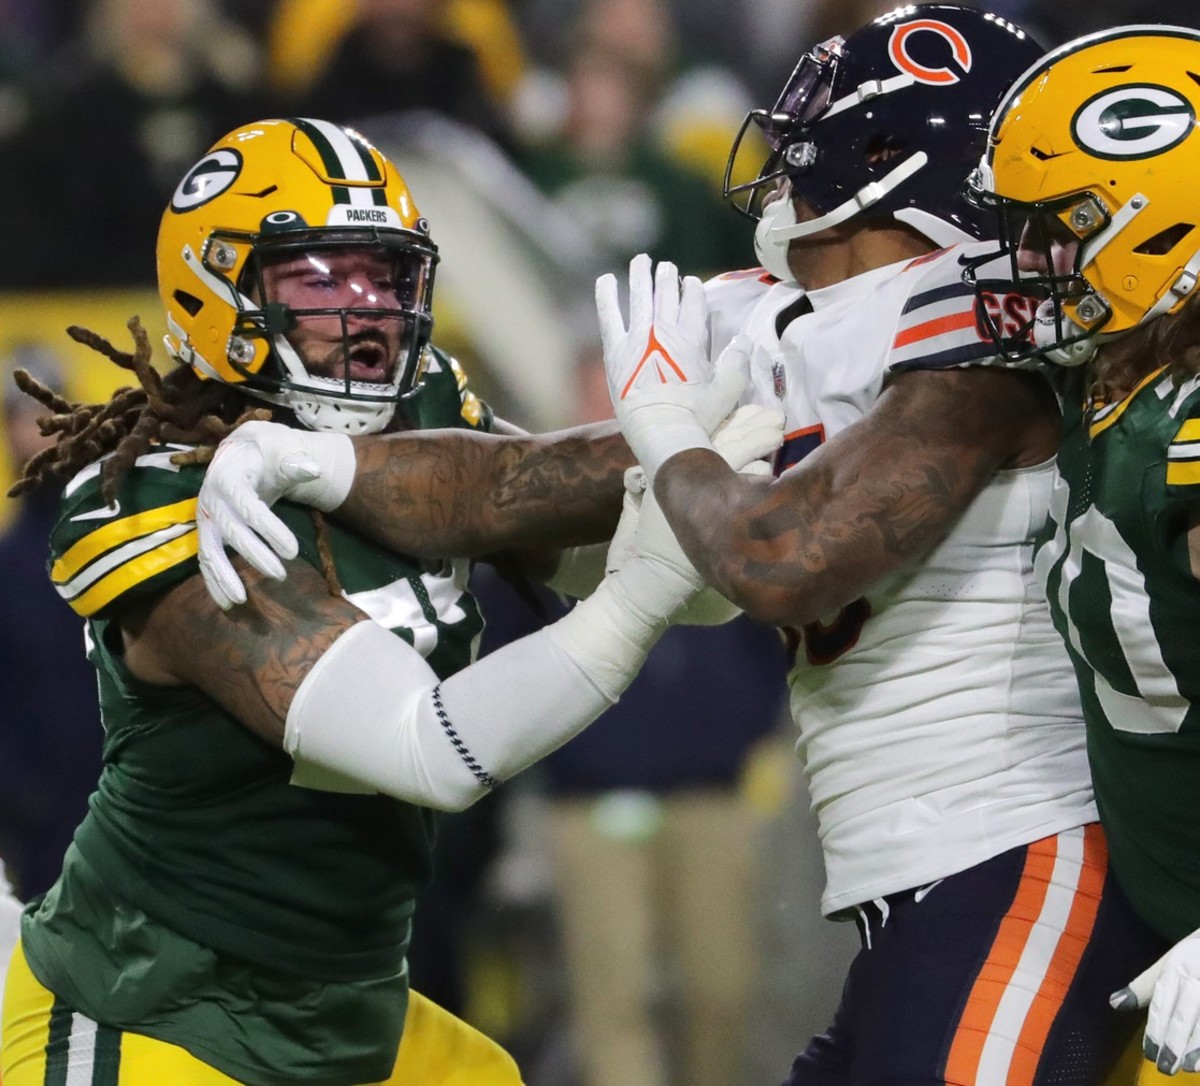 Green Bay Packers guard Billy Turner (77) blocks Chicago Bears linebacker Bruce Irvin (55) during the first quarter of their game Sunday, December 12, 2021 at Lambeau Field in Green Bay, Wis.